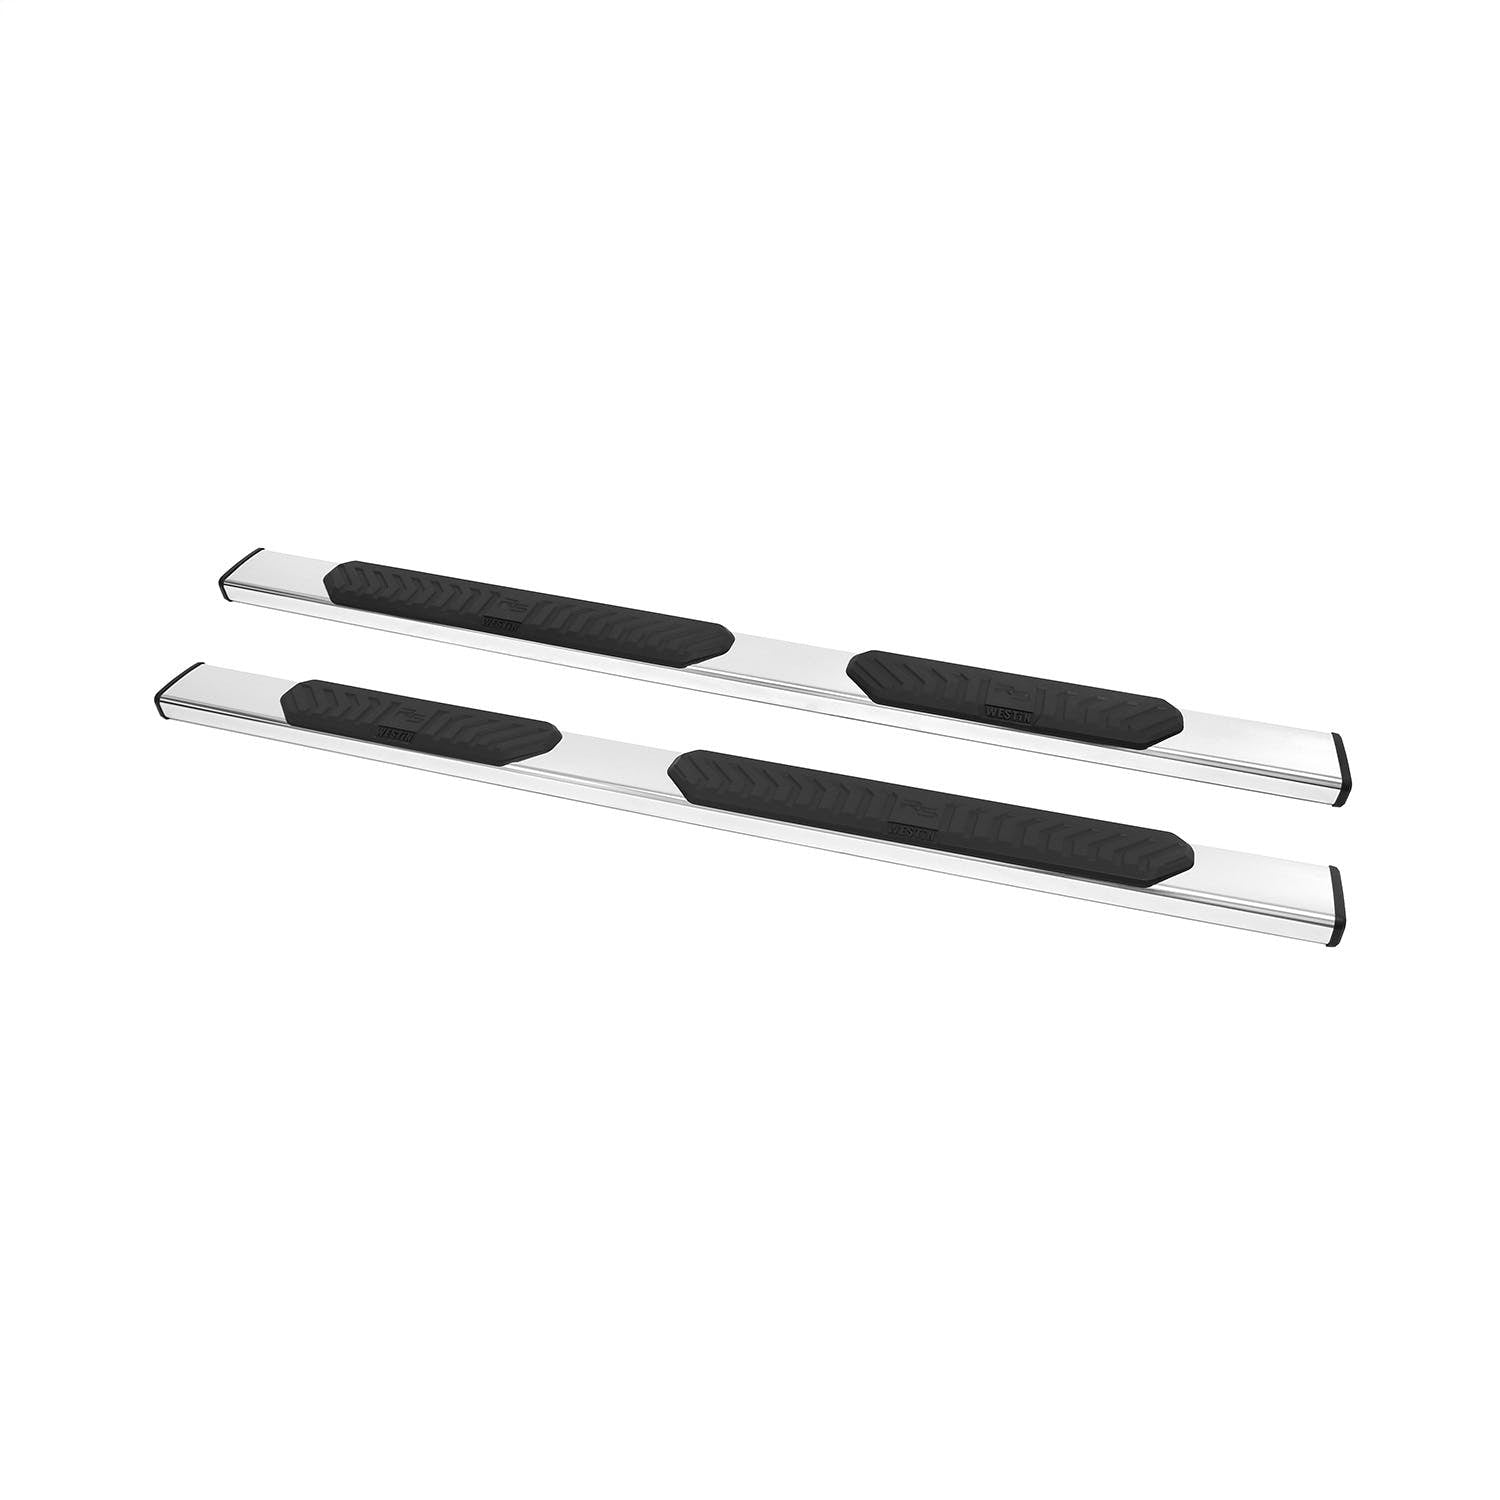 Westin Automotive 28-51170 R5 Nerf Step Bars Stainless Steel